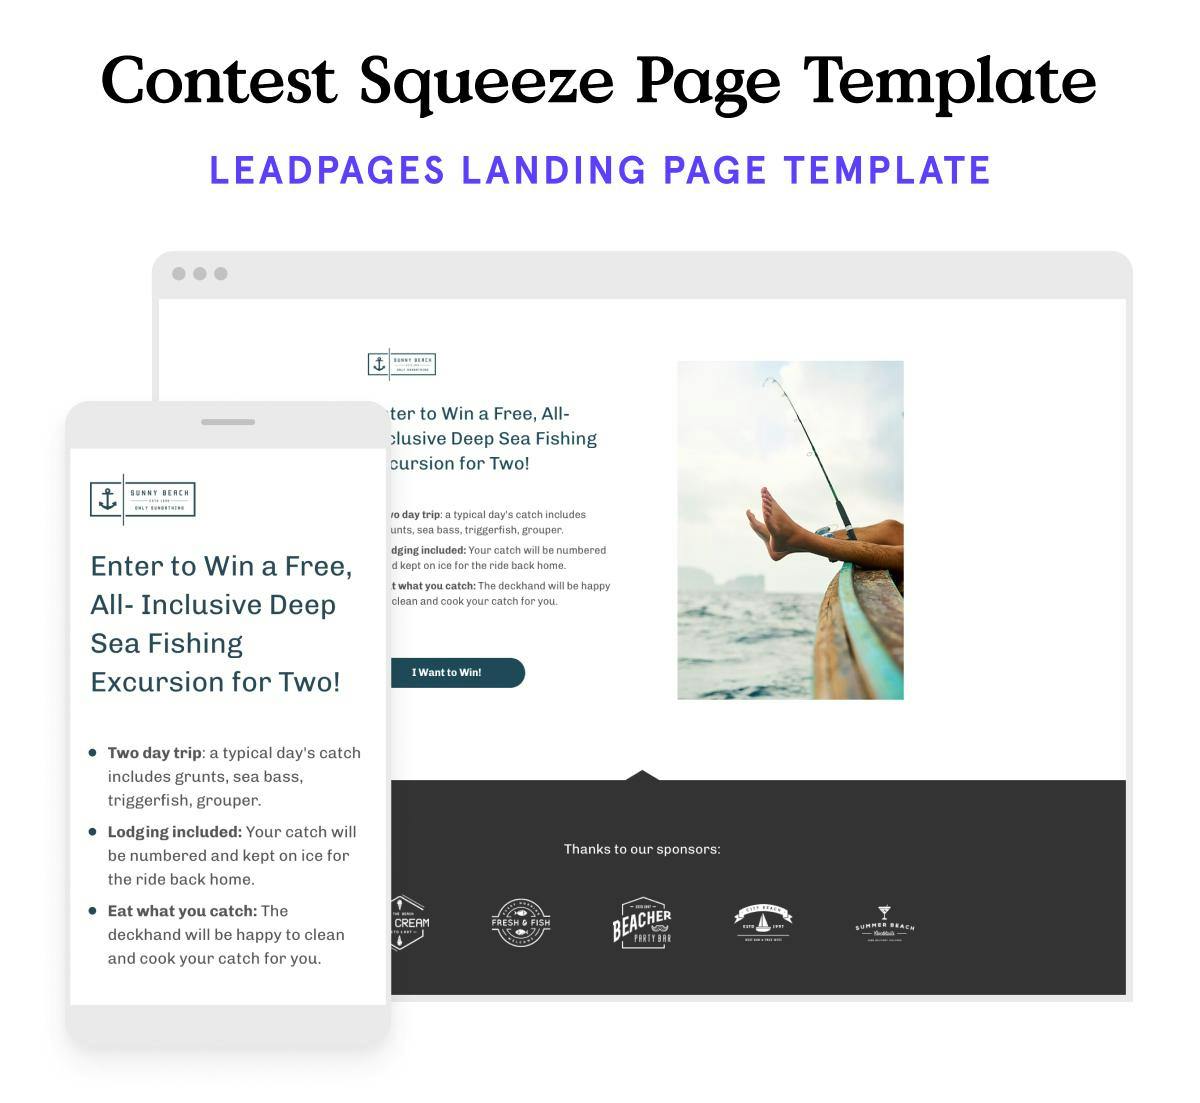 Contest squeeze page template